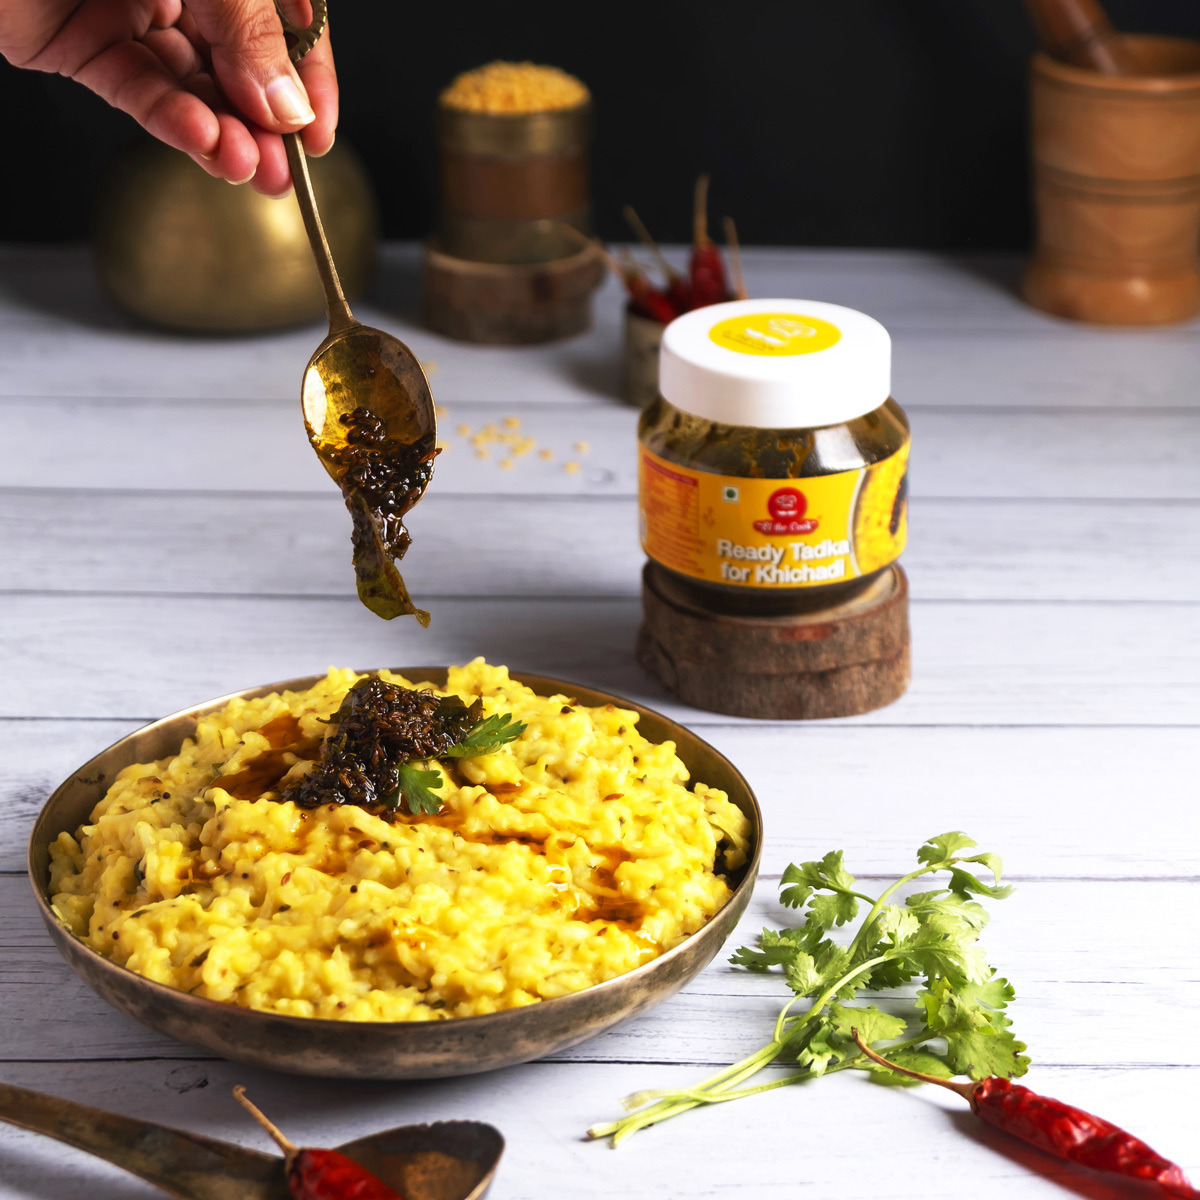 EL The Cook Ready-to-Use Ghee Tadka(CONCENRATED Whole Spice Tempering) for Kitchari, Indian Lentils Seasoning, Super Saver Jar Pack, 6.34oz, Vegetarian, Gluten-Free (Flavor: Dal Kitchari)